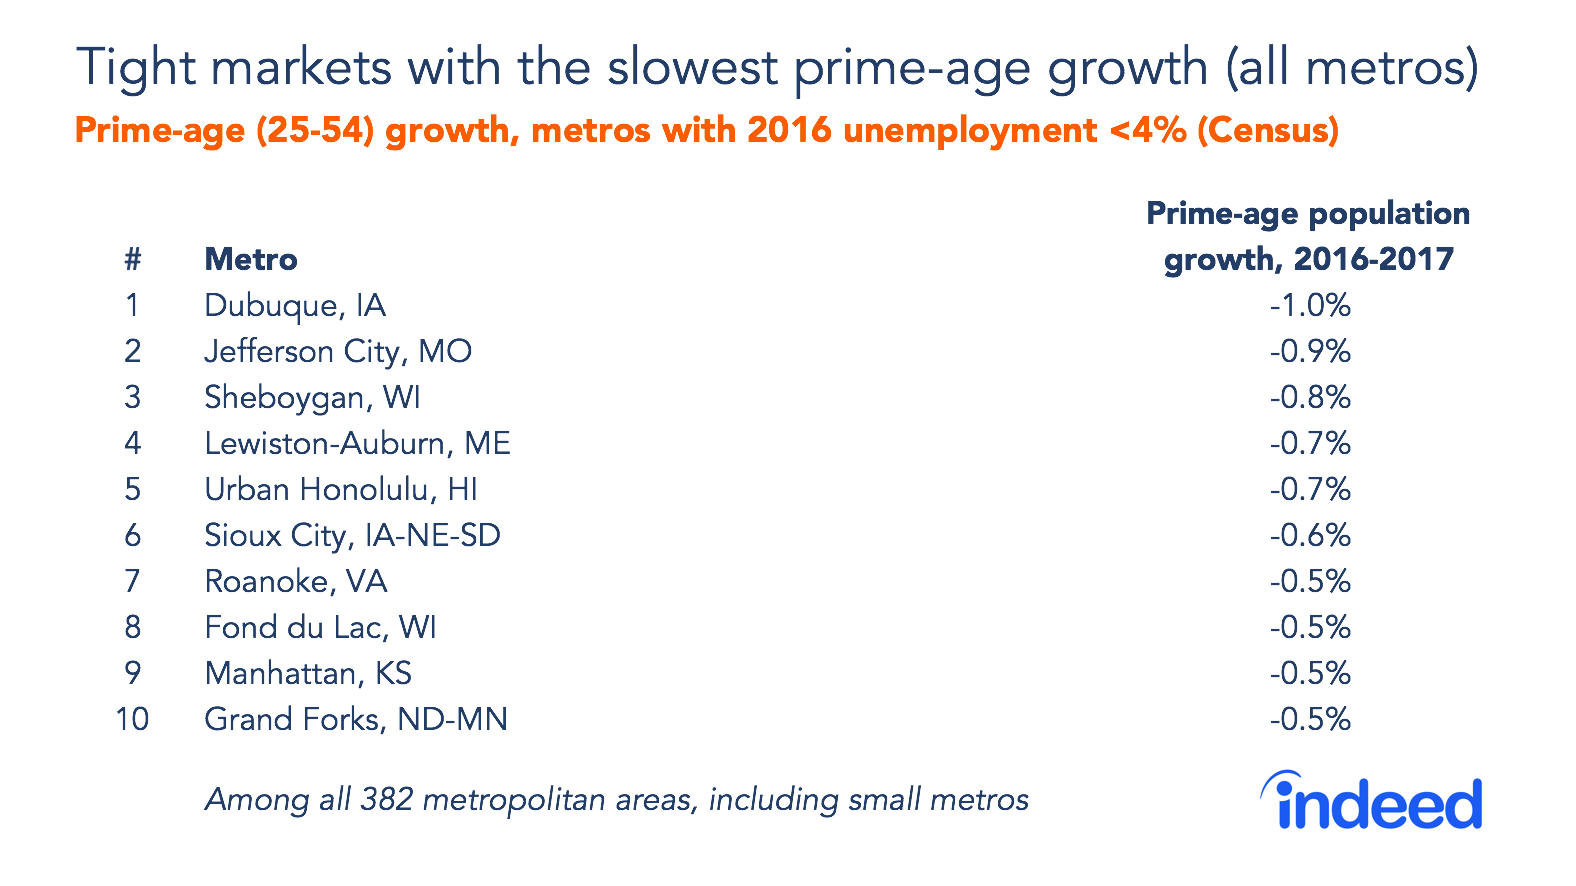 Tight markets with the slowest prime-age growth